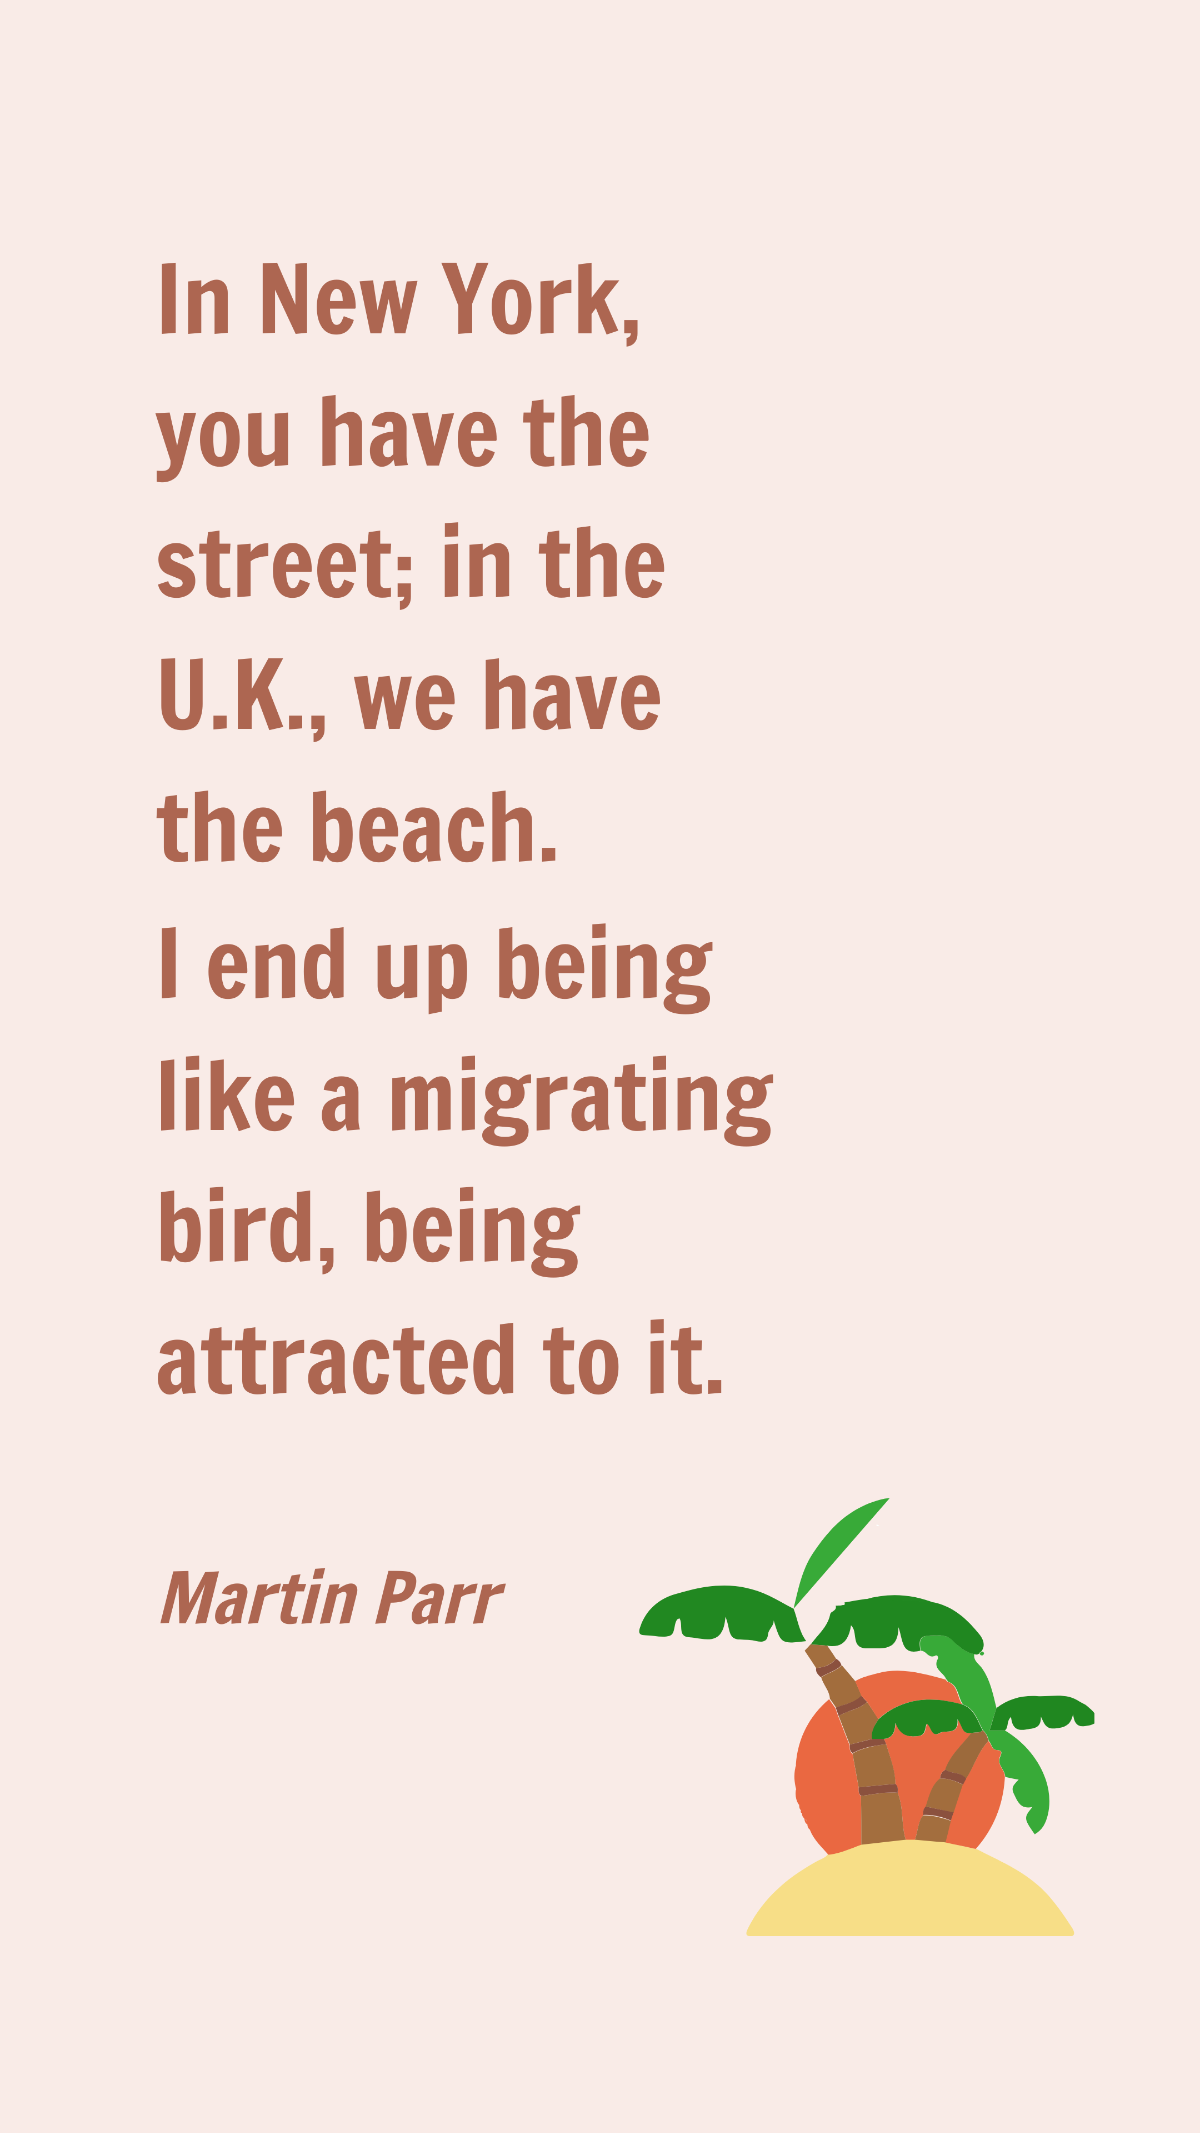 Martin Parr - In New York, you have the street; in the U.K., we have the beach. I end up being like a migrating bird, being attracted to it.